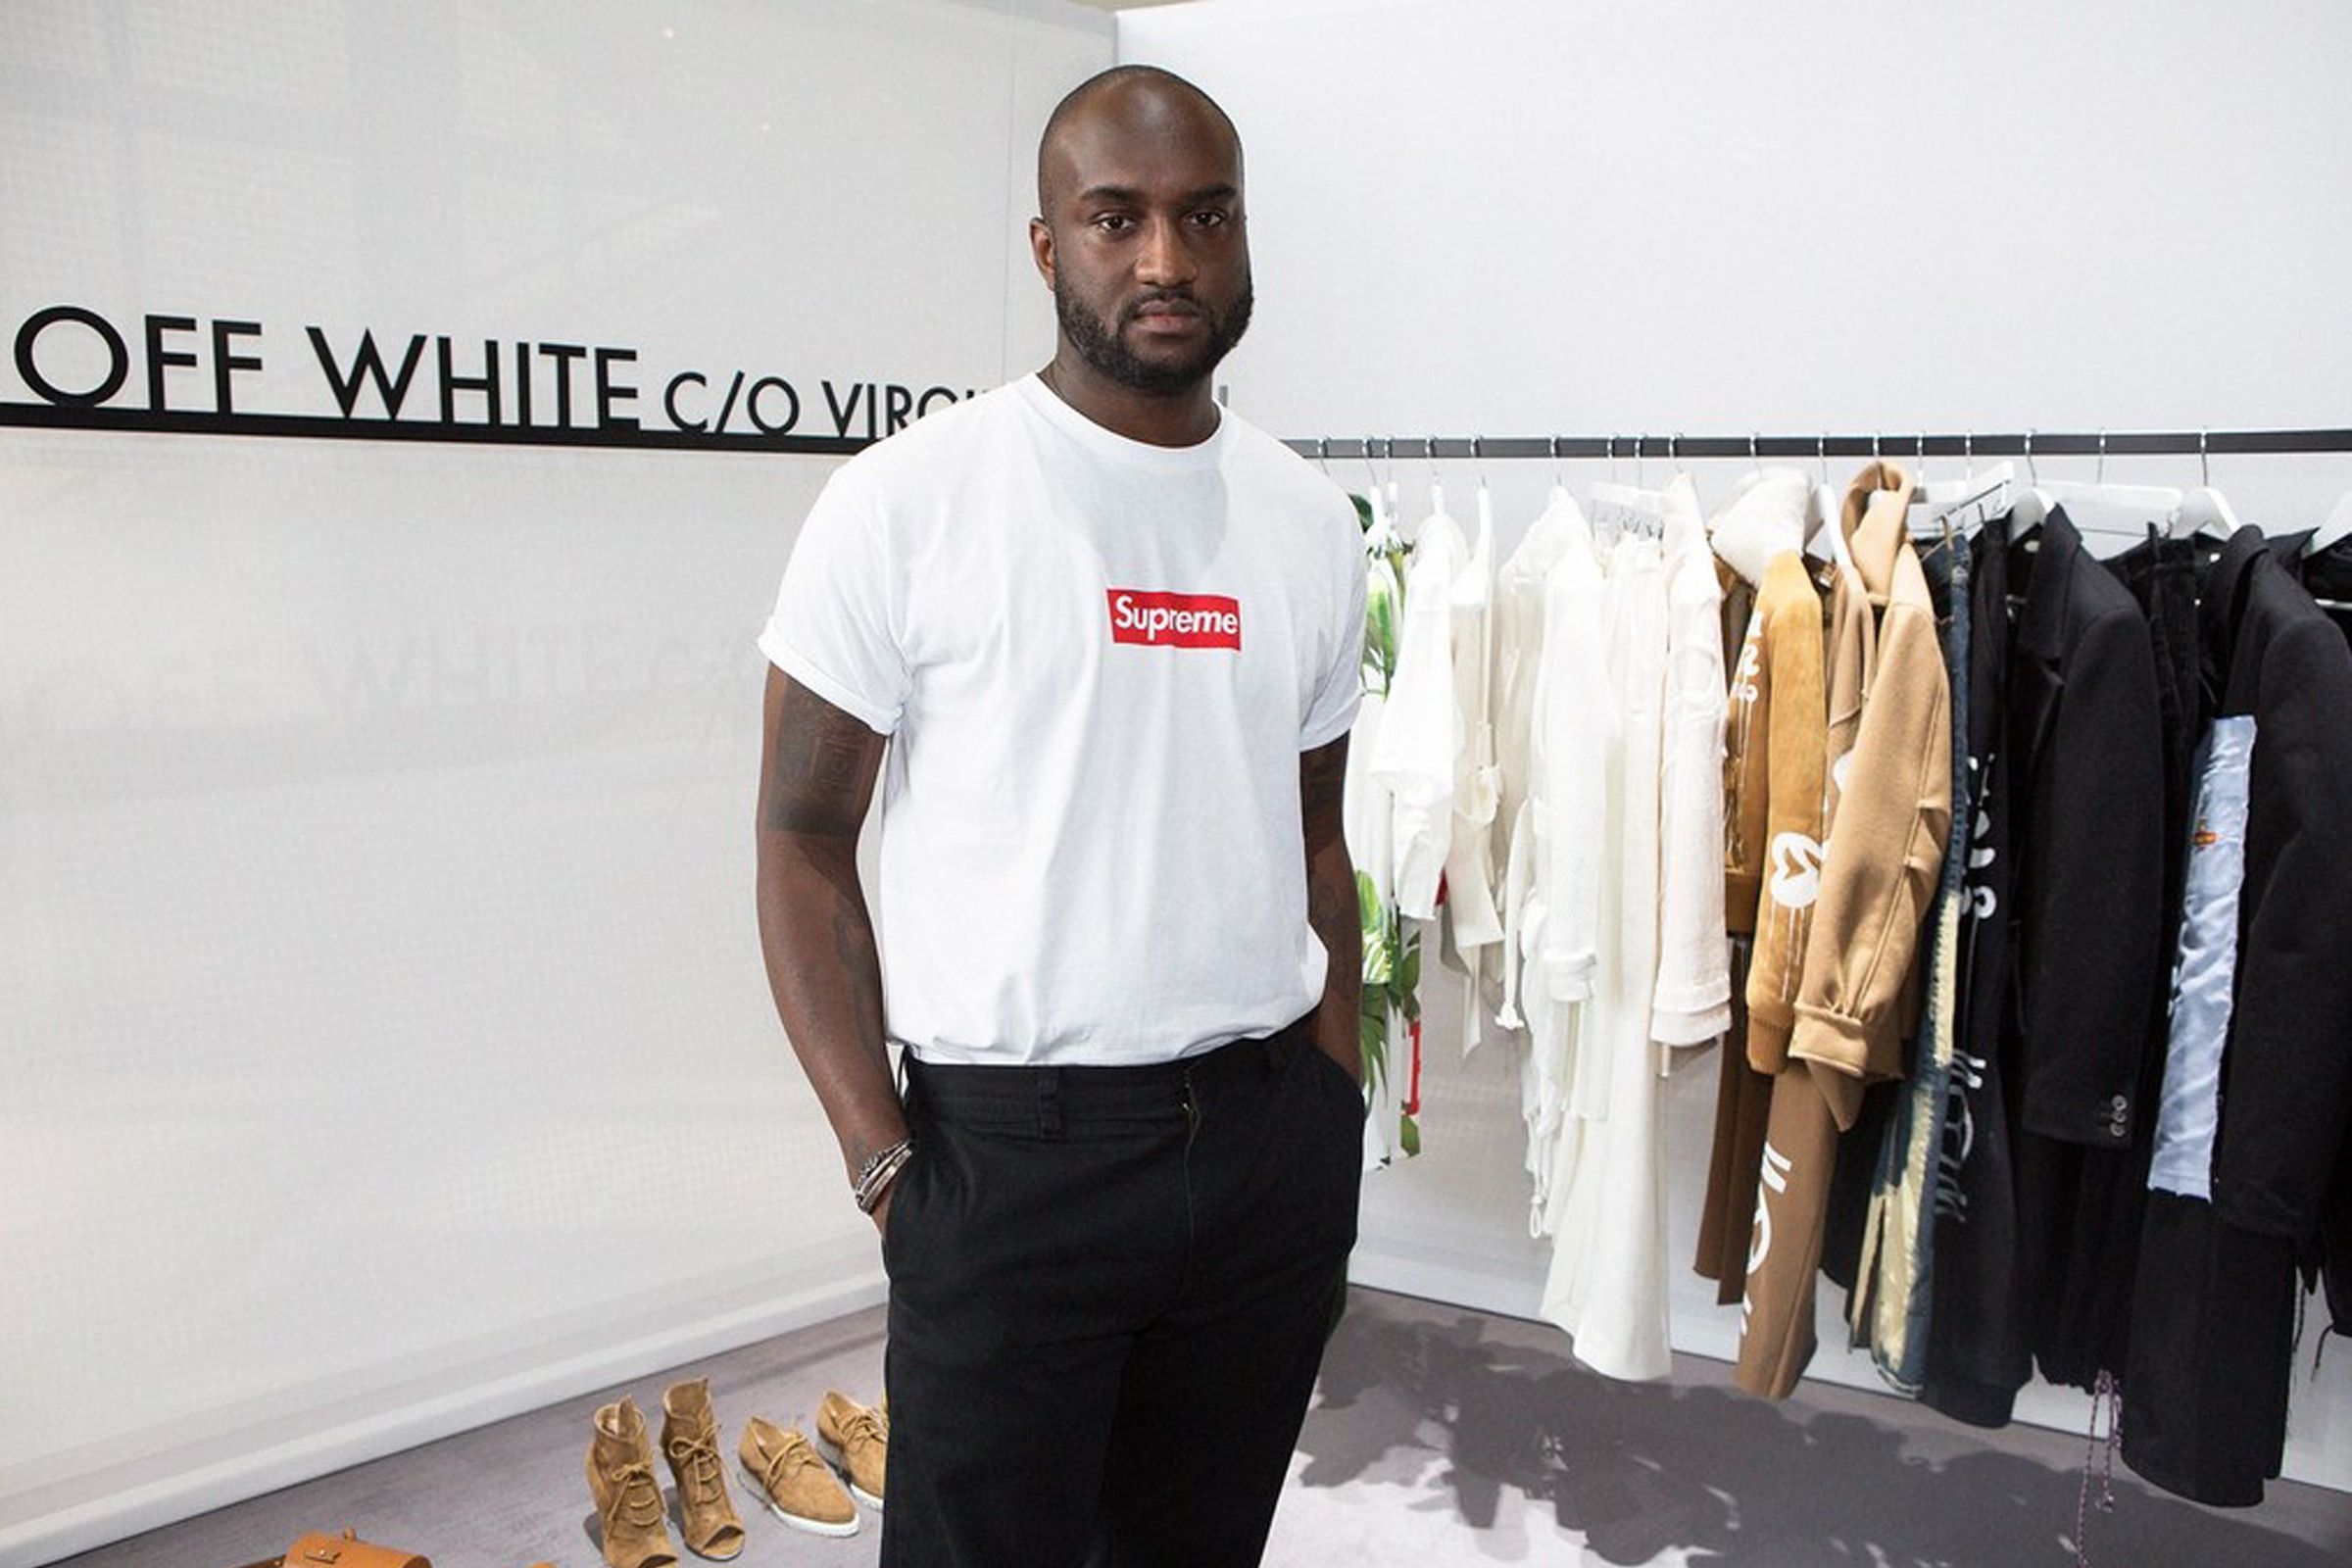 How Off-White shaped fashion culture